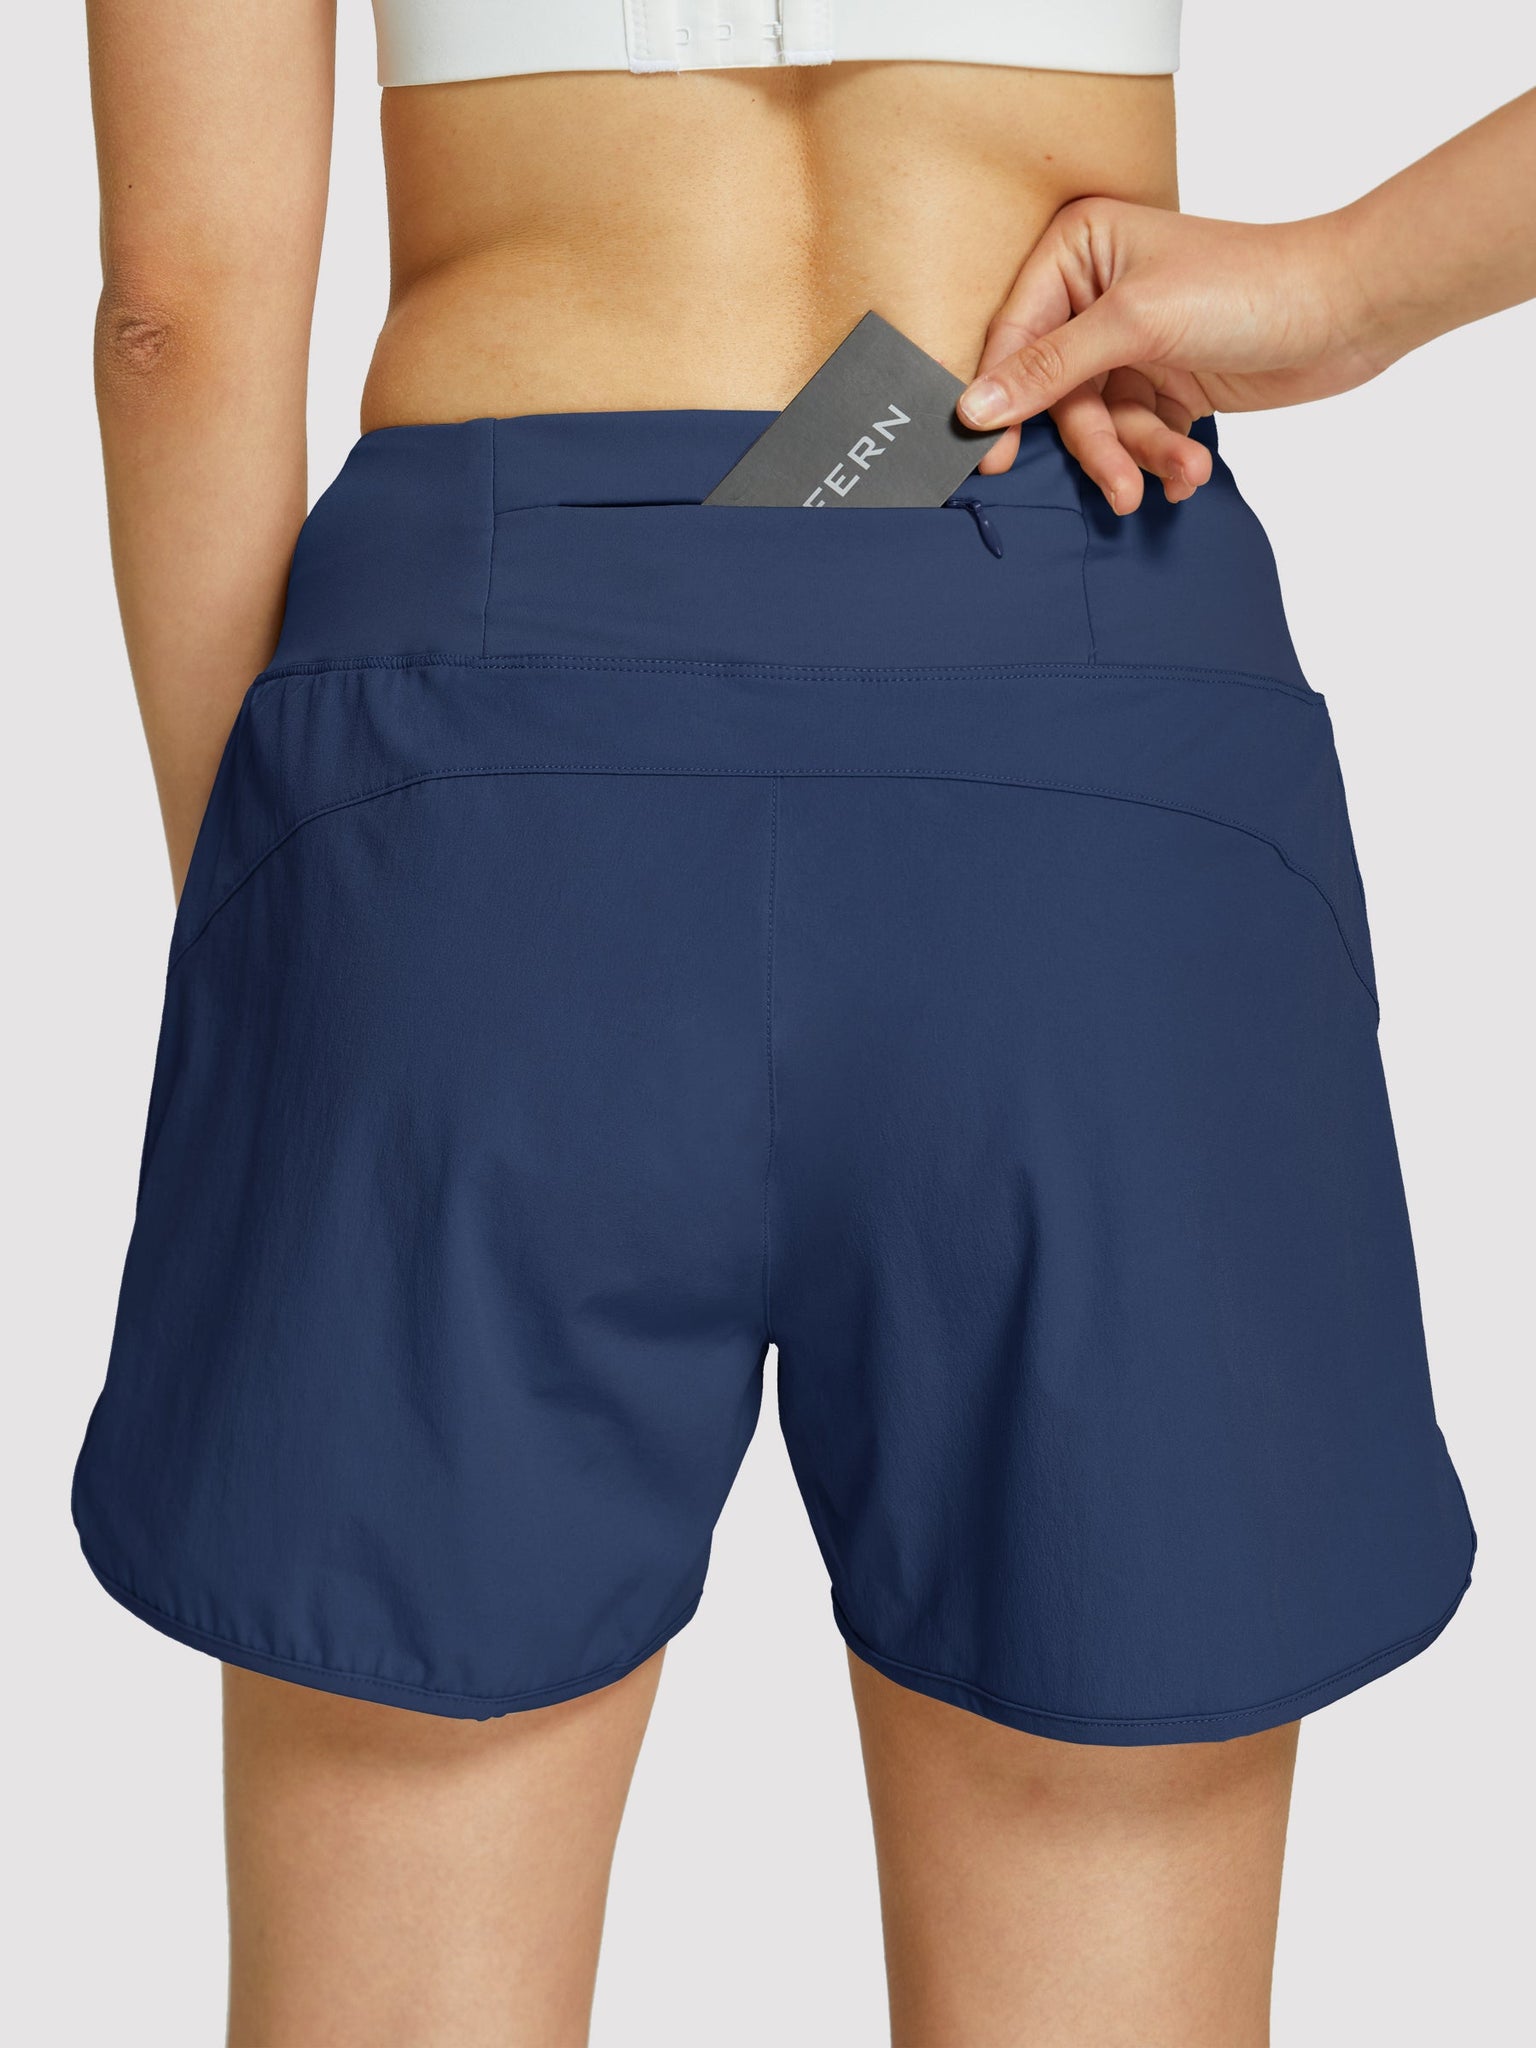 Womens High Rise Running Athletic Shorts_Navy3